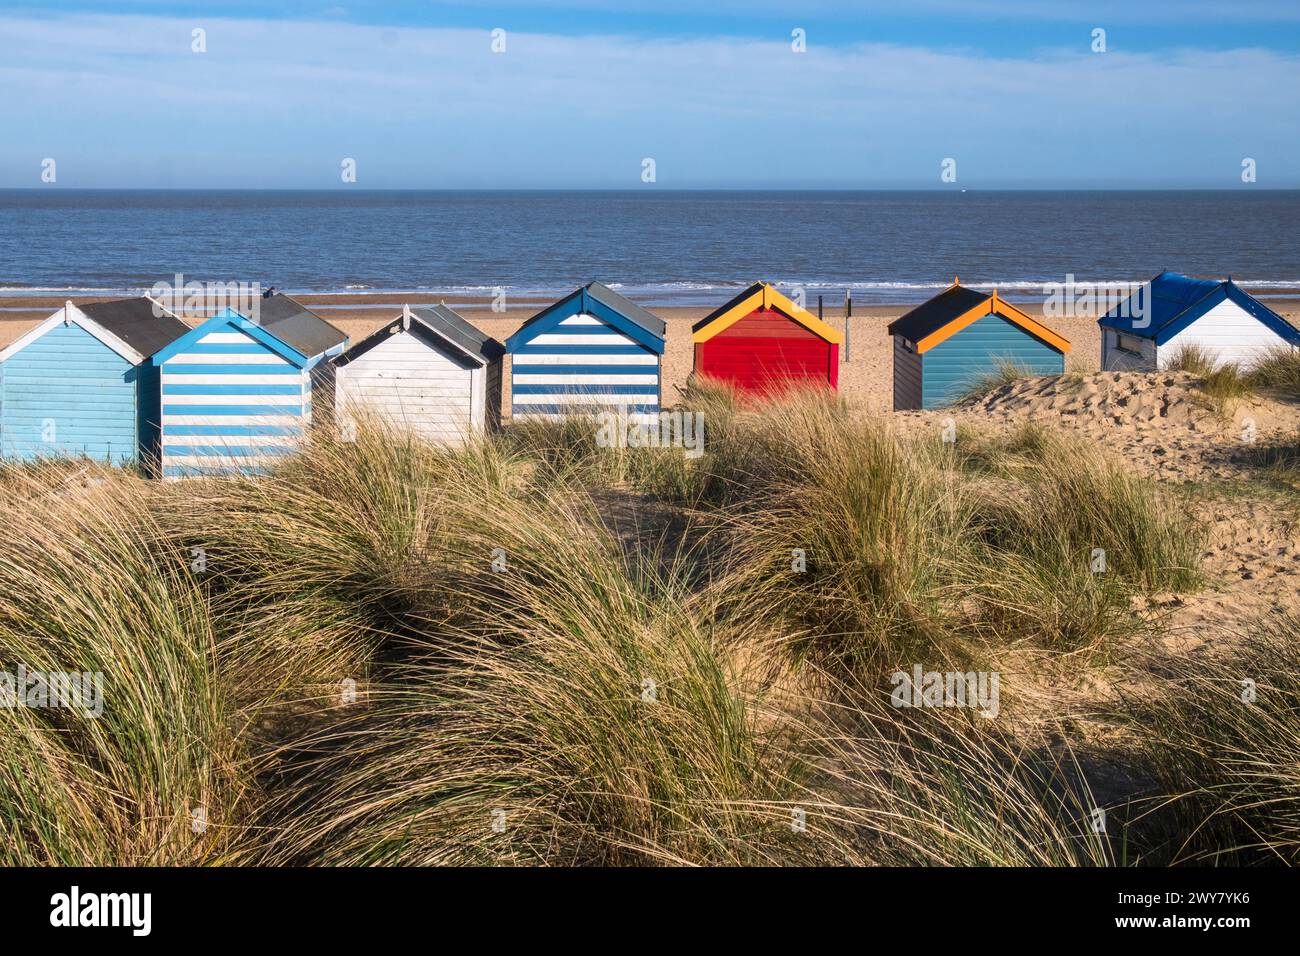 Colourful beach huts on Southwold sea shore. Suffolk, east anglia, UK.Marram grass on the dunes behind the huts. Stock Photo